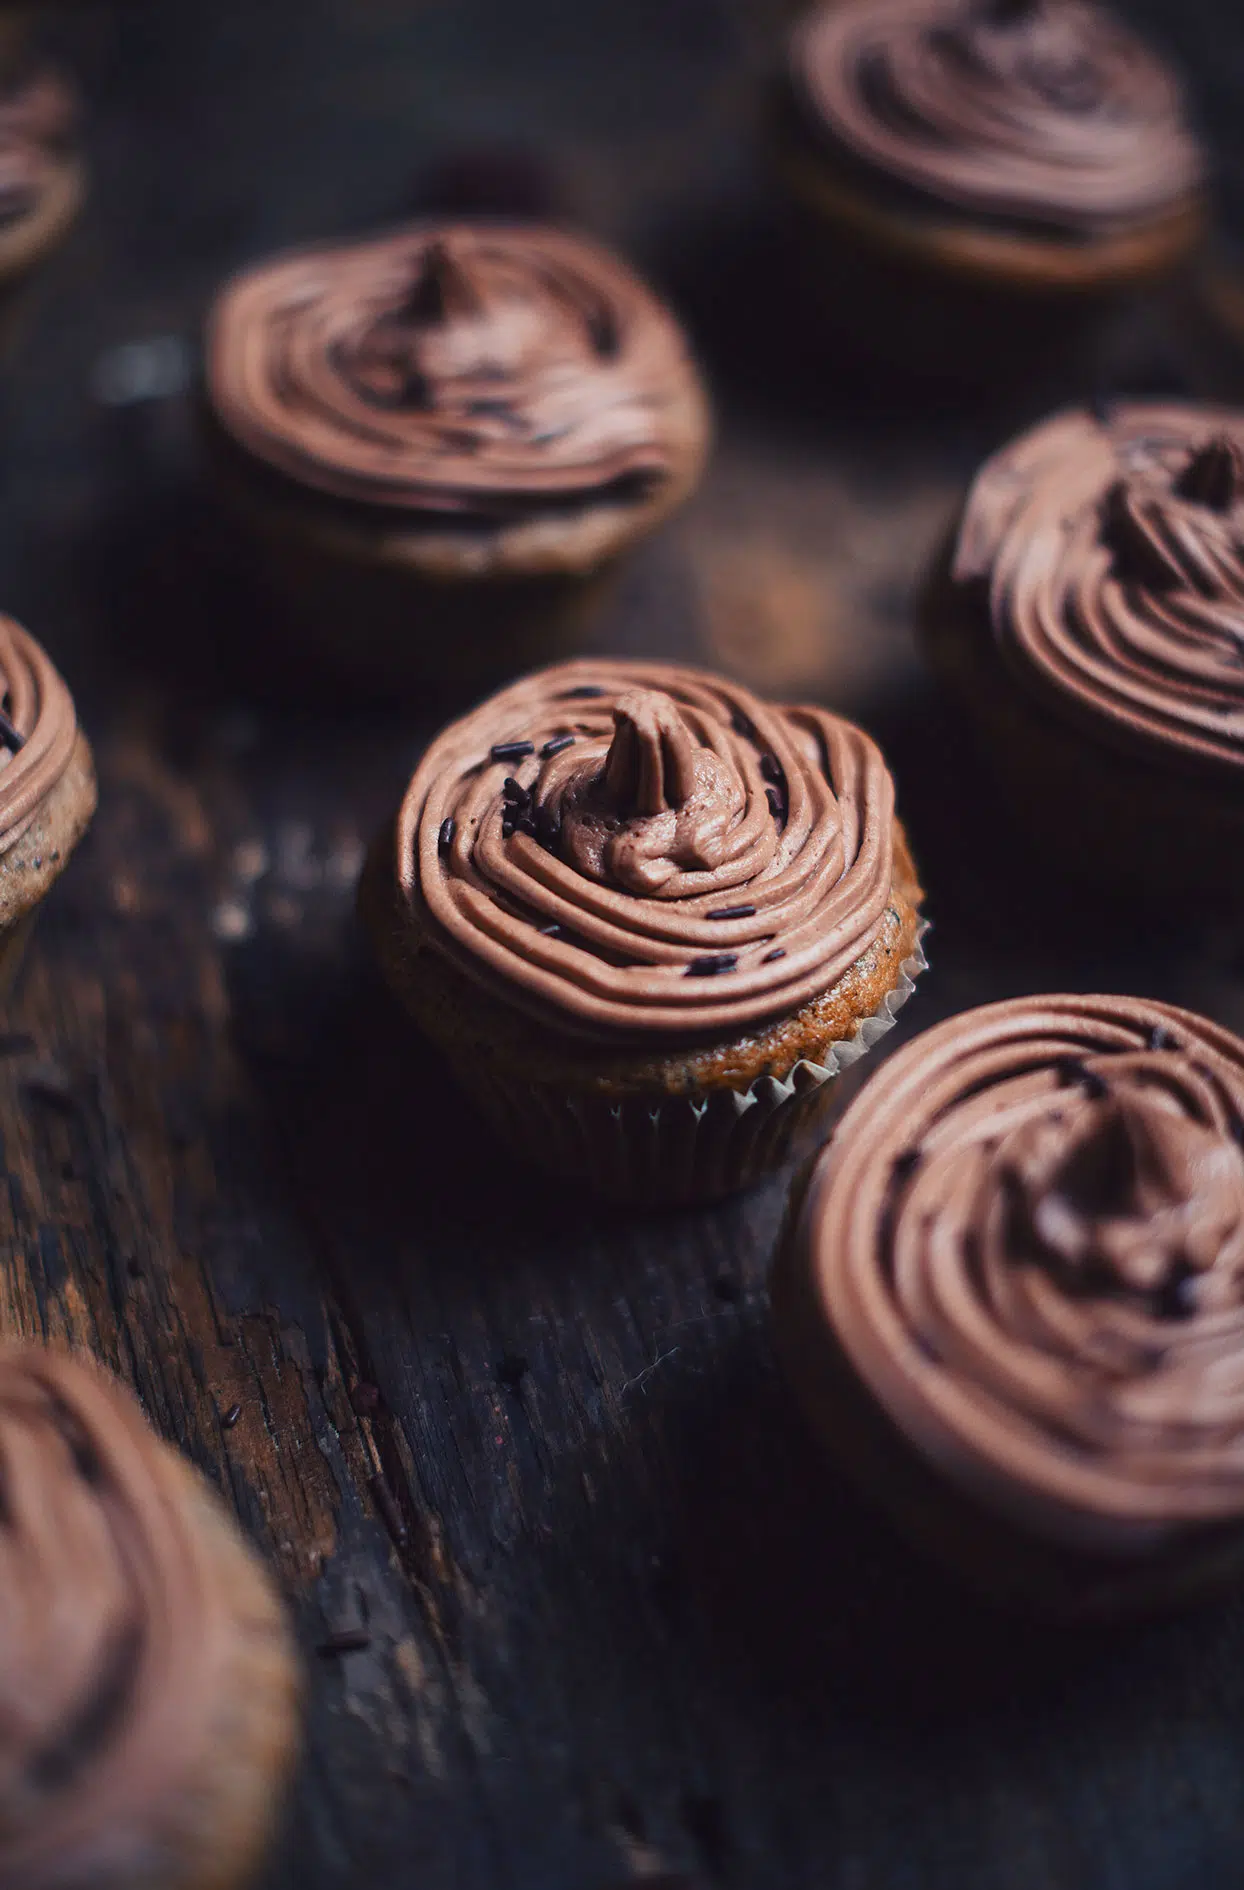 Chocolate cupcakes with truffles spread icing